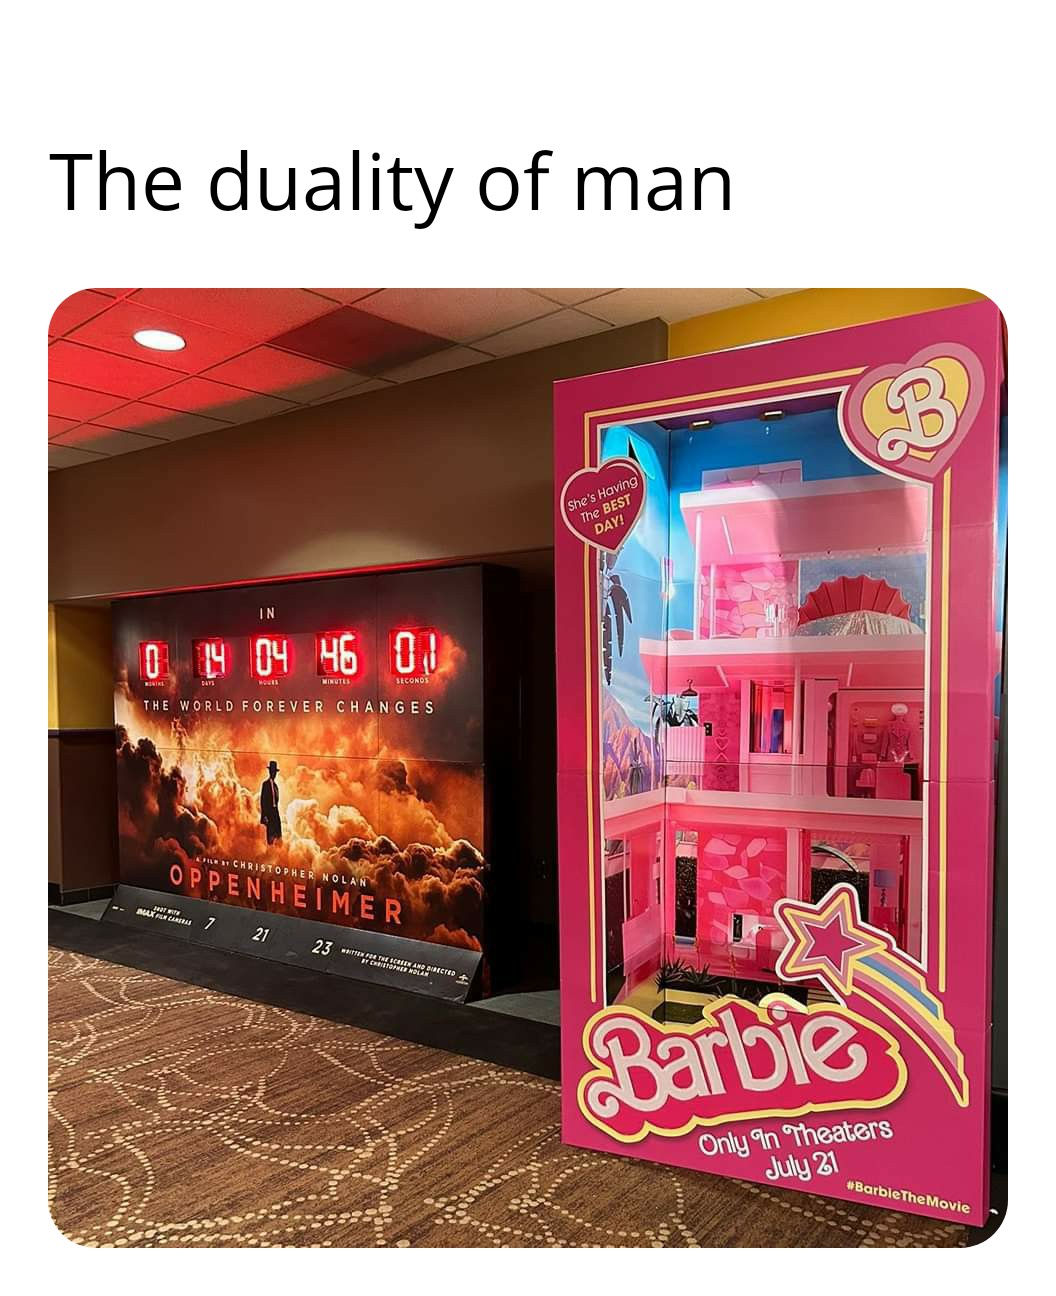 dank memes - barbie - The duality of man In 0 14 04 46 00 Minine Moves Minutes Seconds The World Forever Changes Filet Christopher Nolany Oppenheimer Butan 7 21 23 For The Ca Stopher Molam Usted. She's Having The Best Day! Firs B Barbie Only In Theaters J